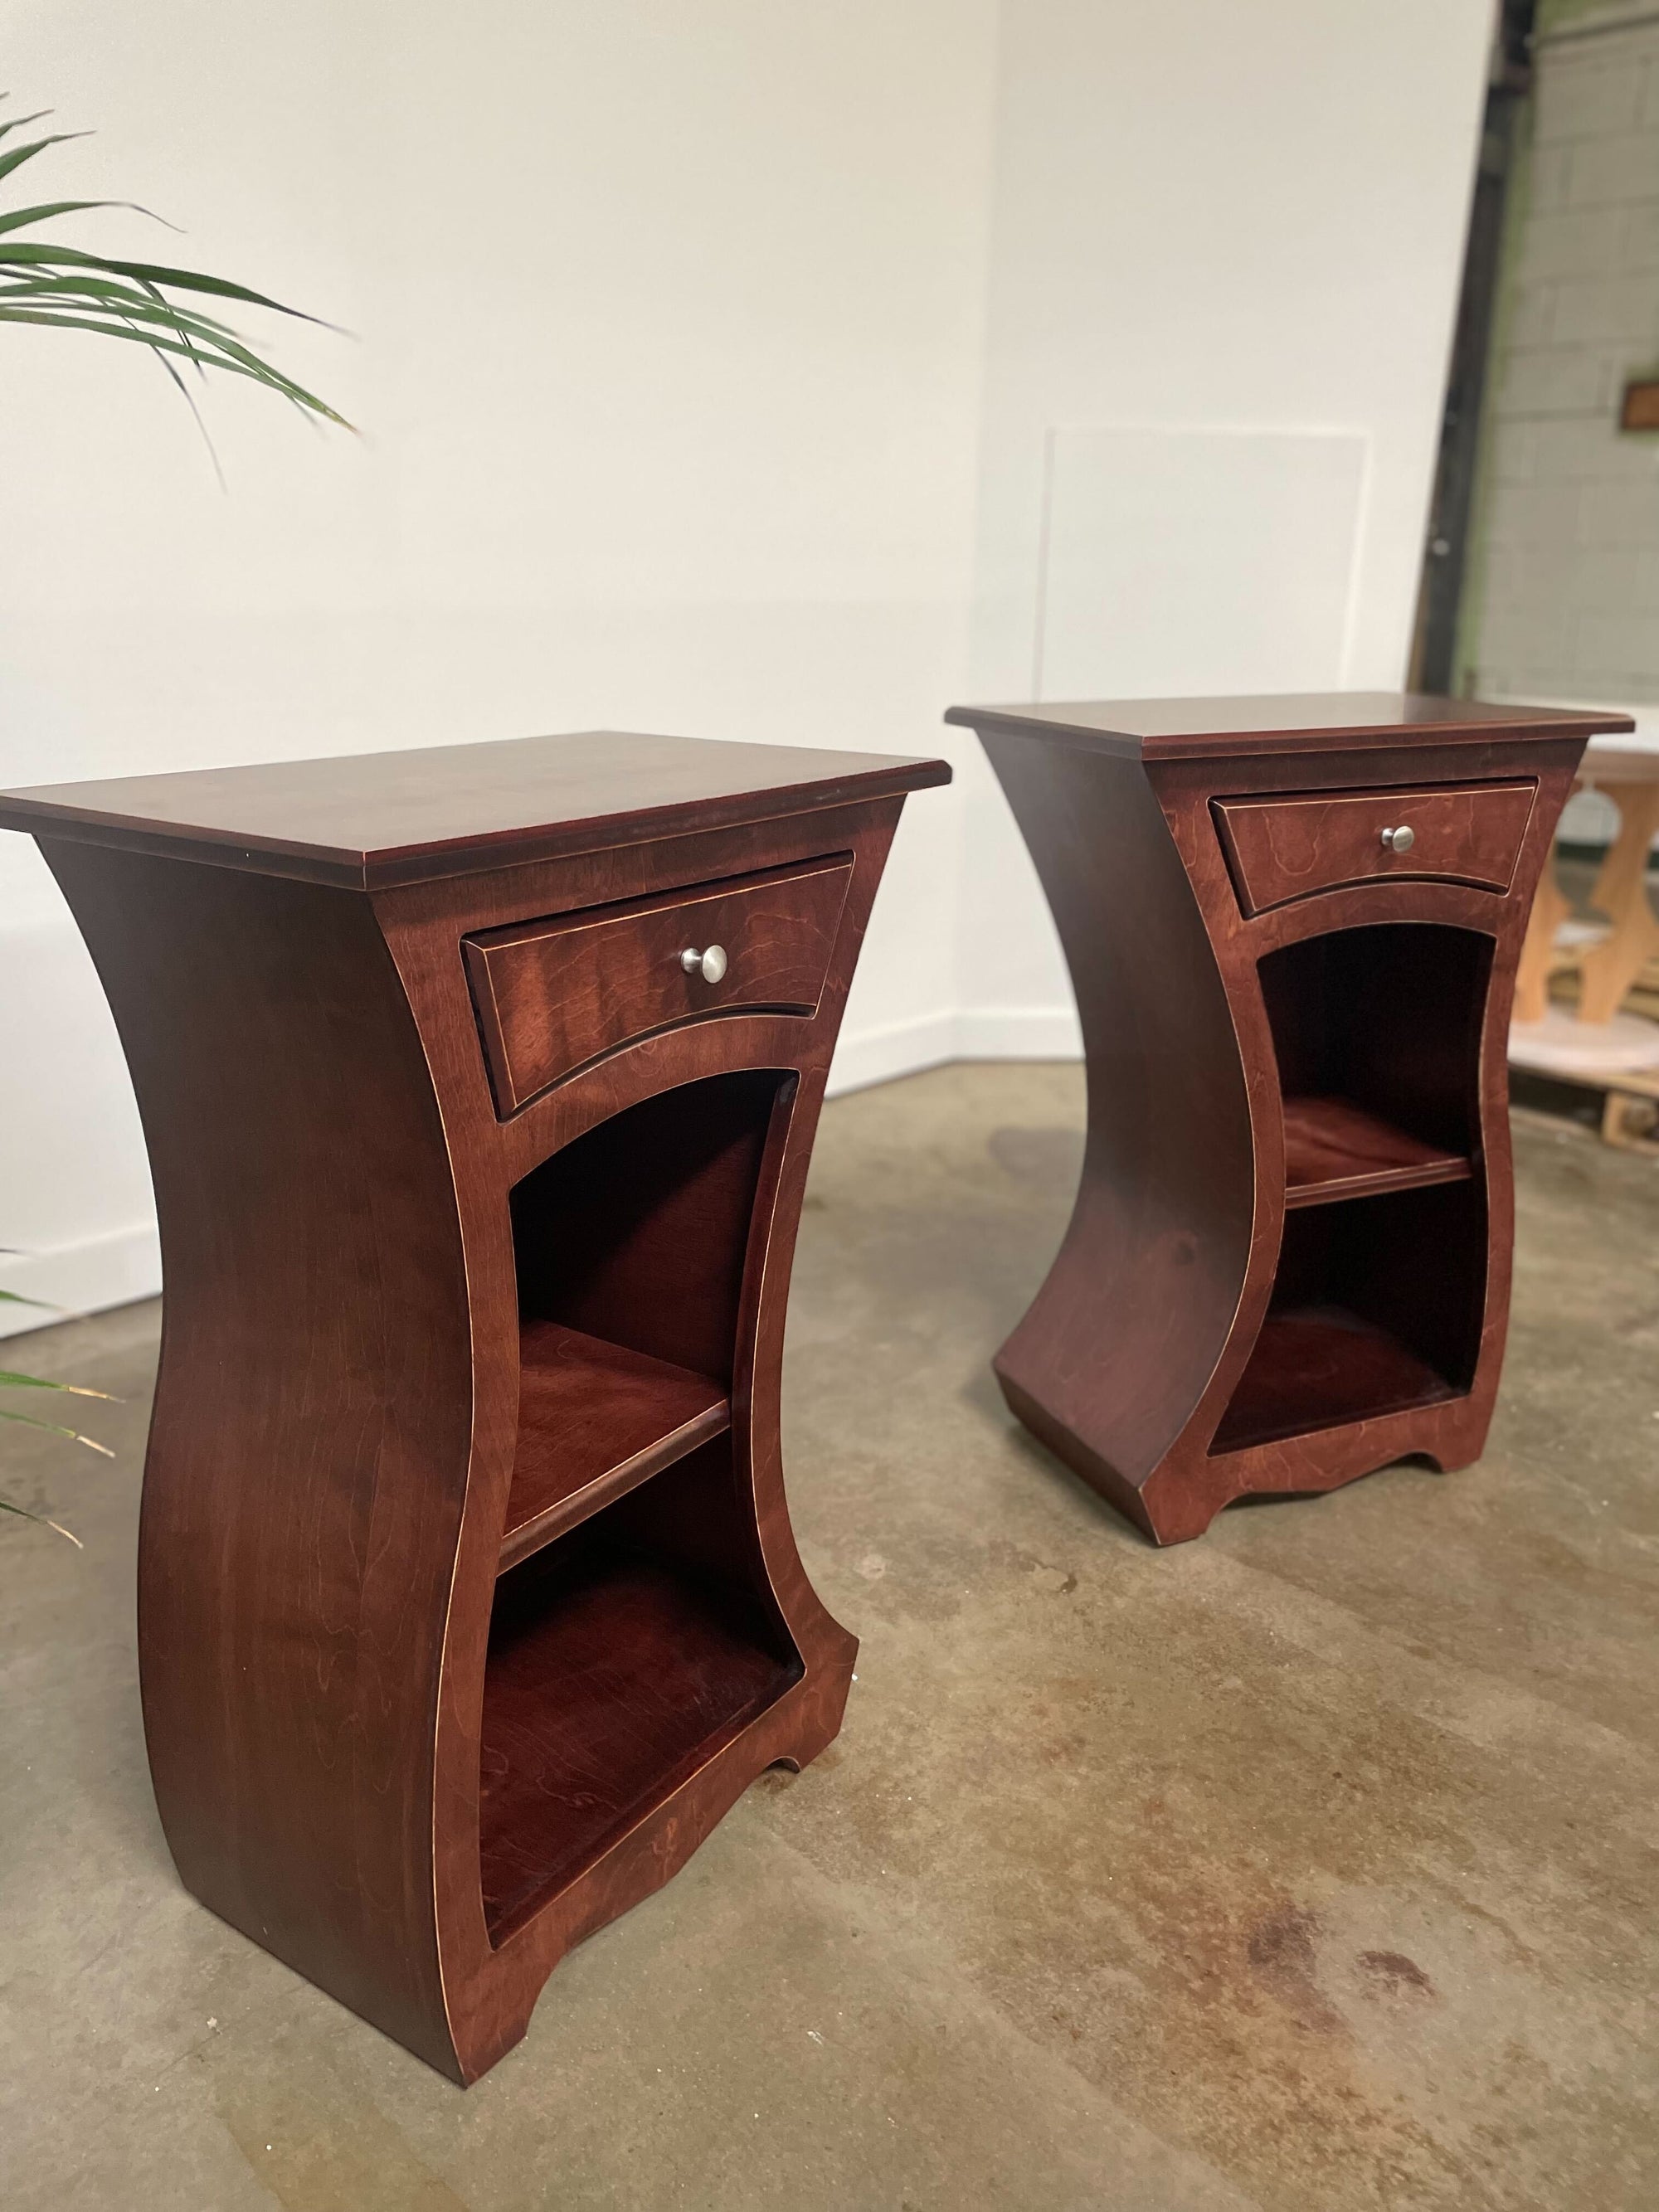 *SALE* - Set of Spark Tables - Left & Right - Mahogany Stain